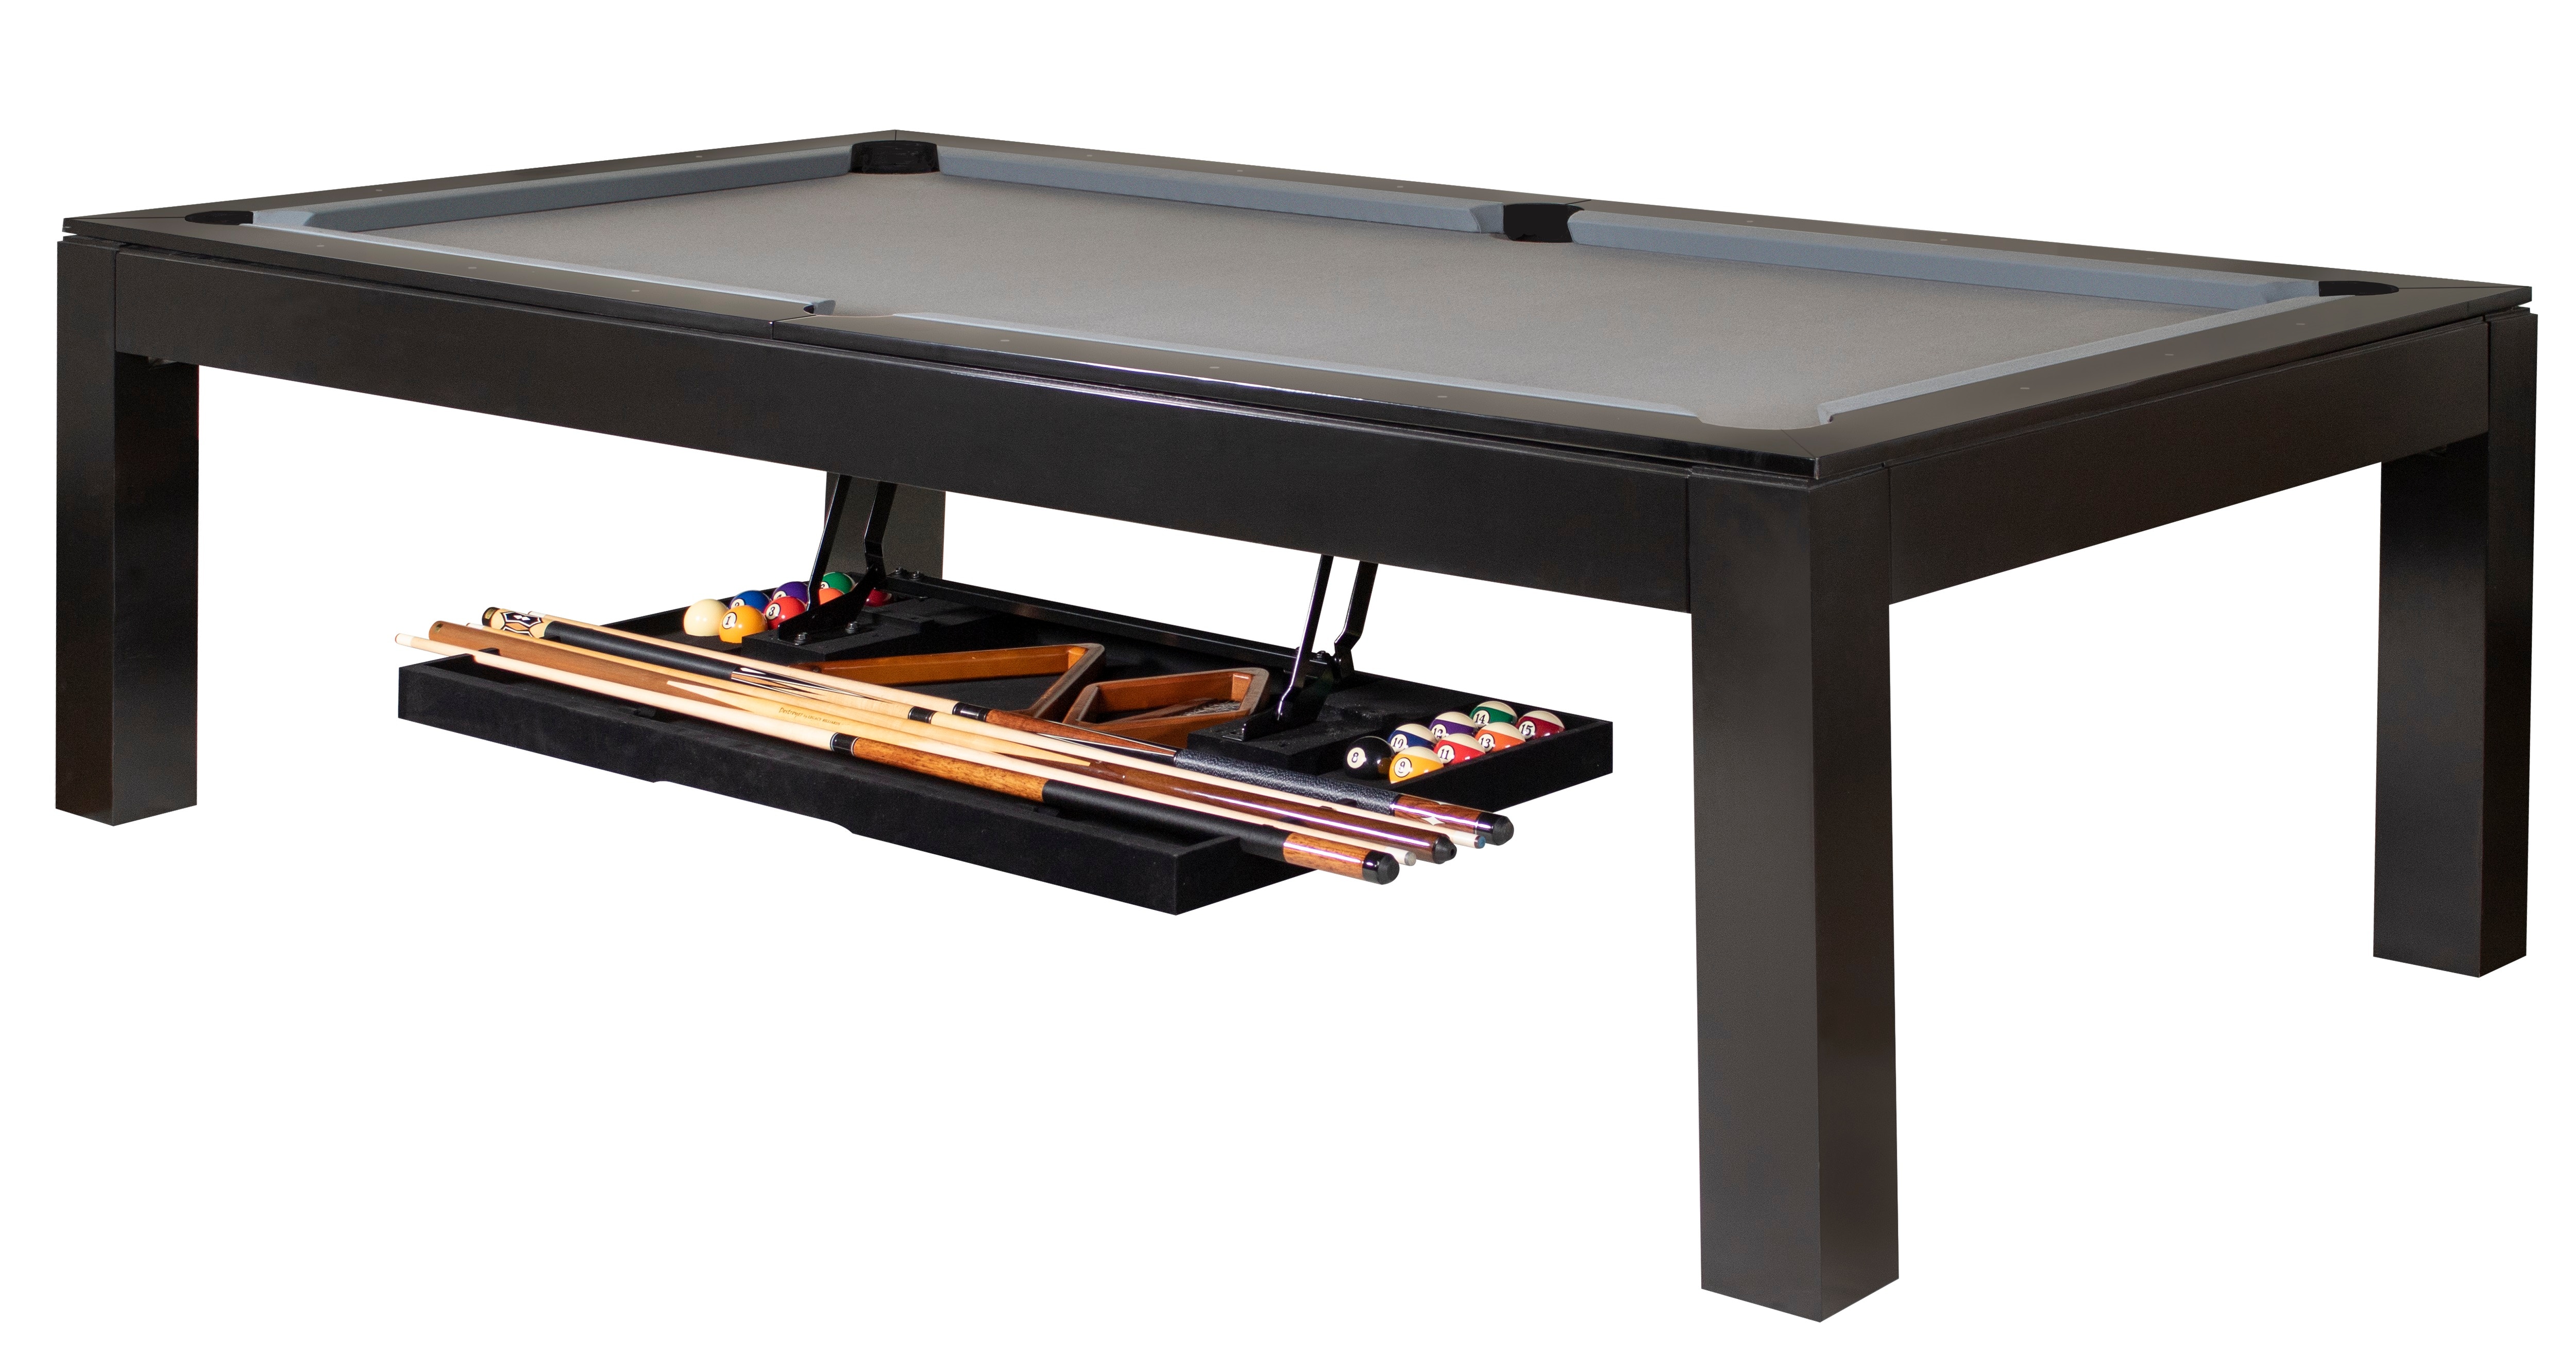 legacy billiards pool table assembly